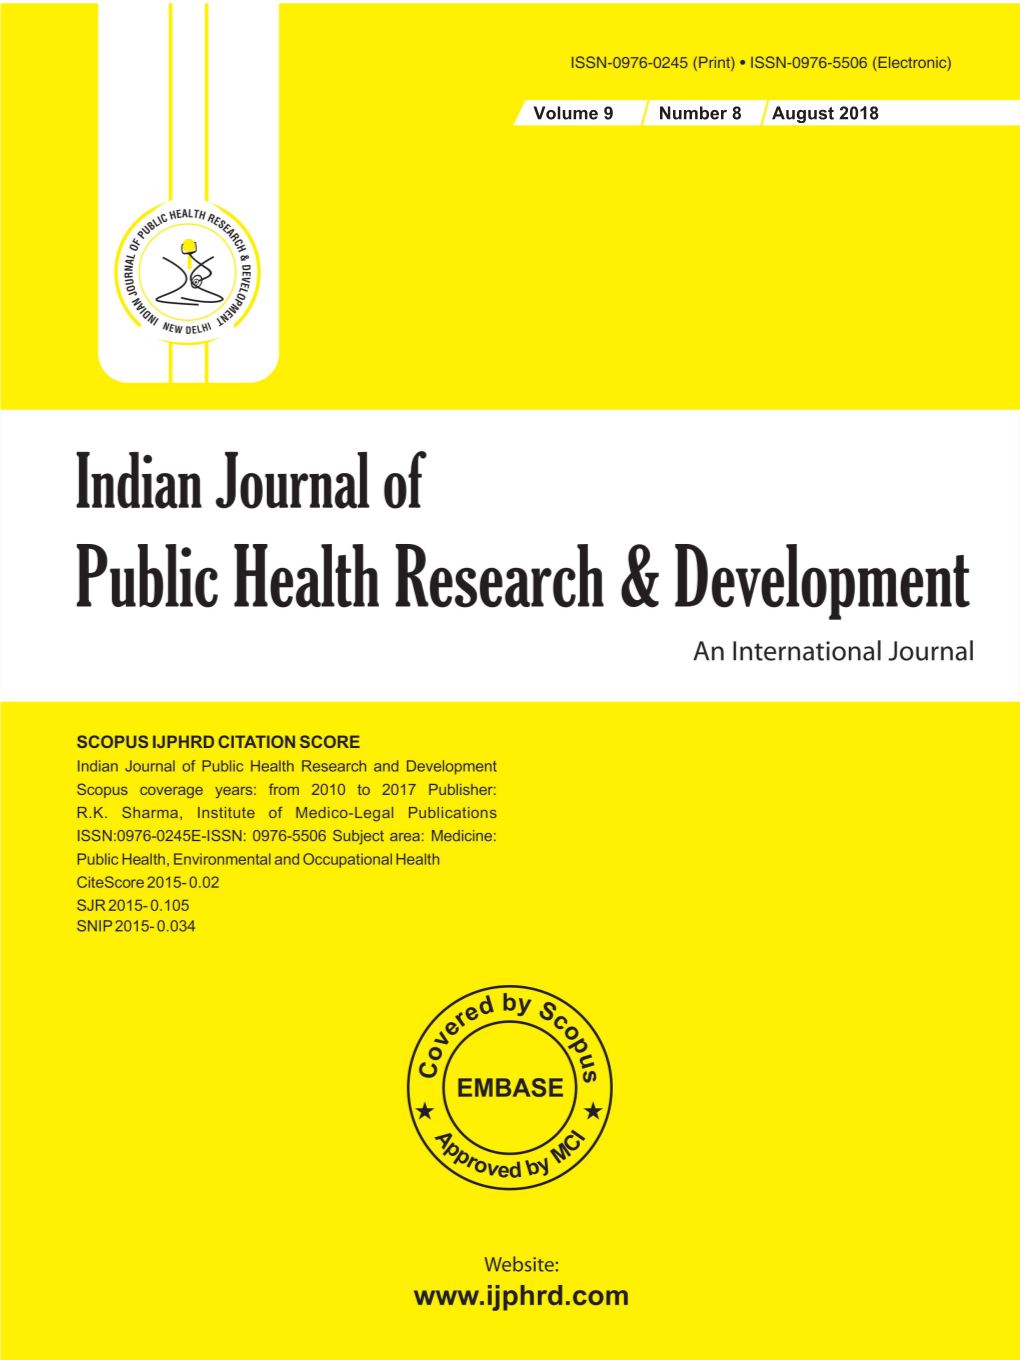 Indian Journal of Public Health Research & Development